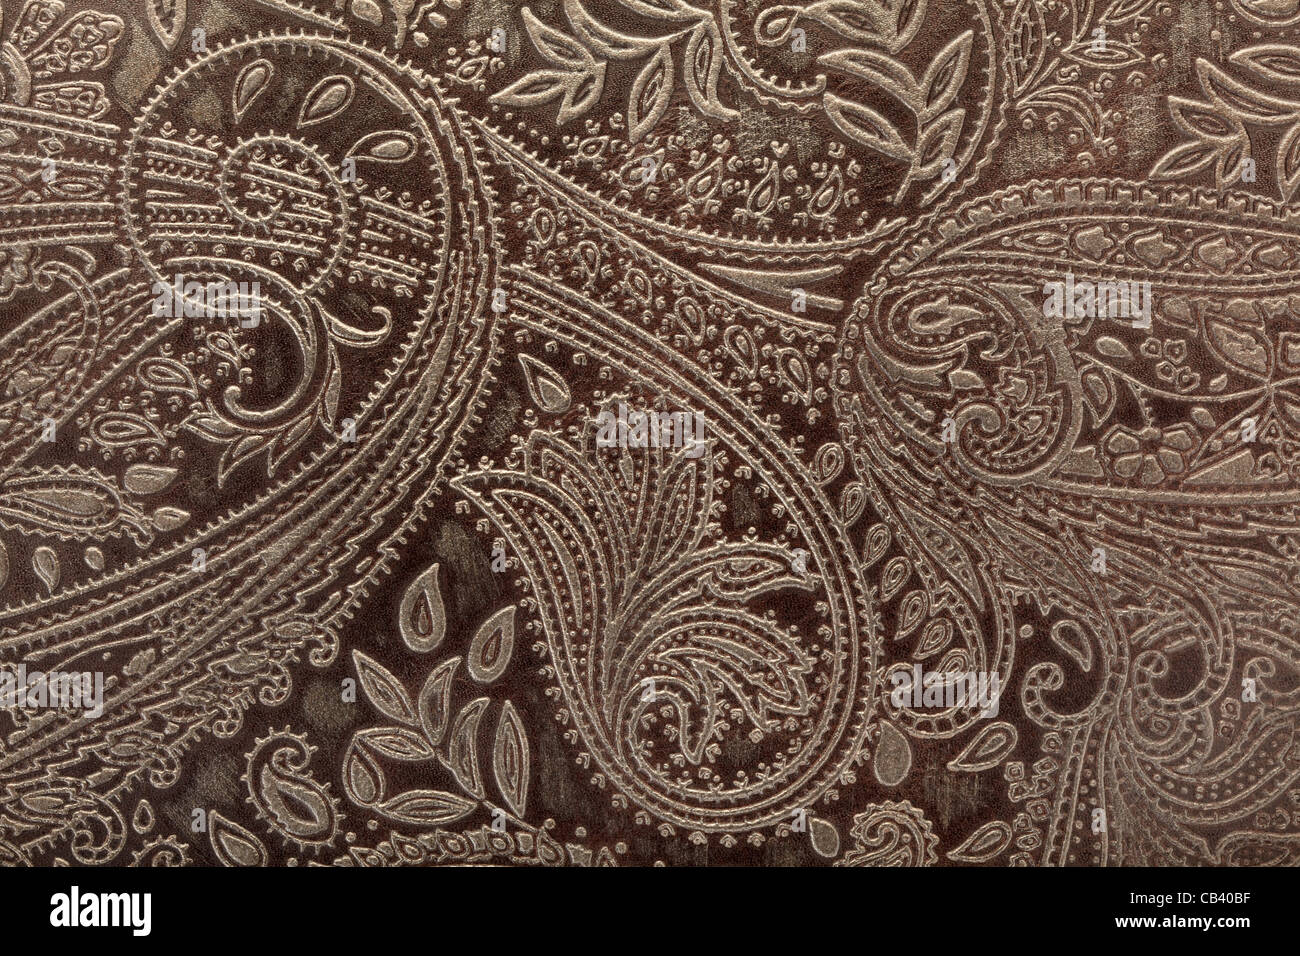 Leather floral pattern background Stock Photo